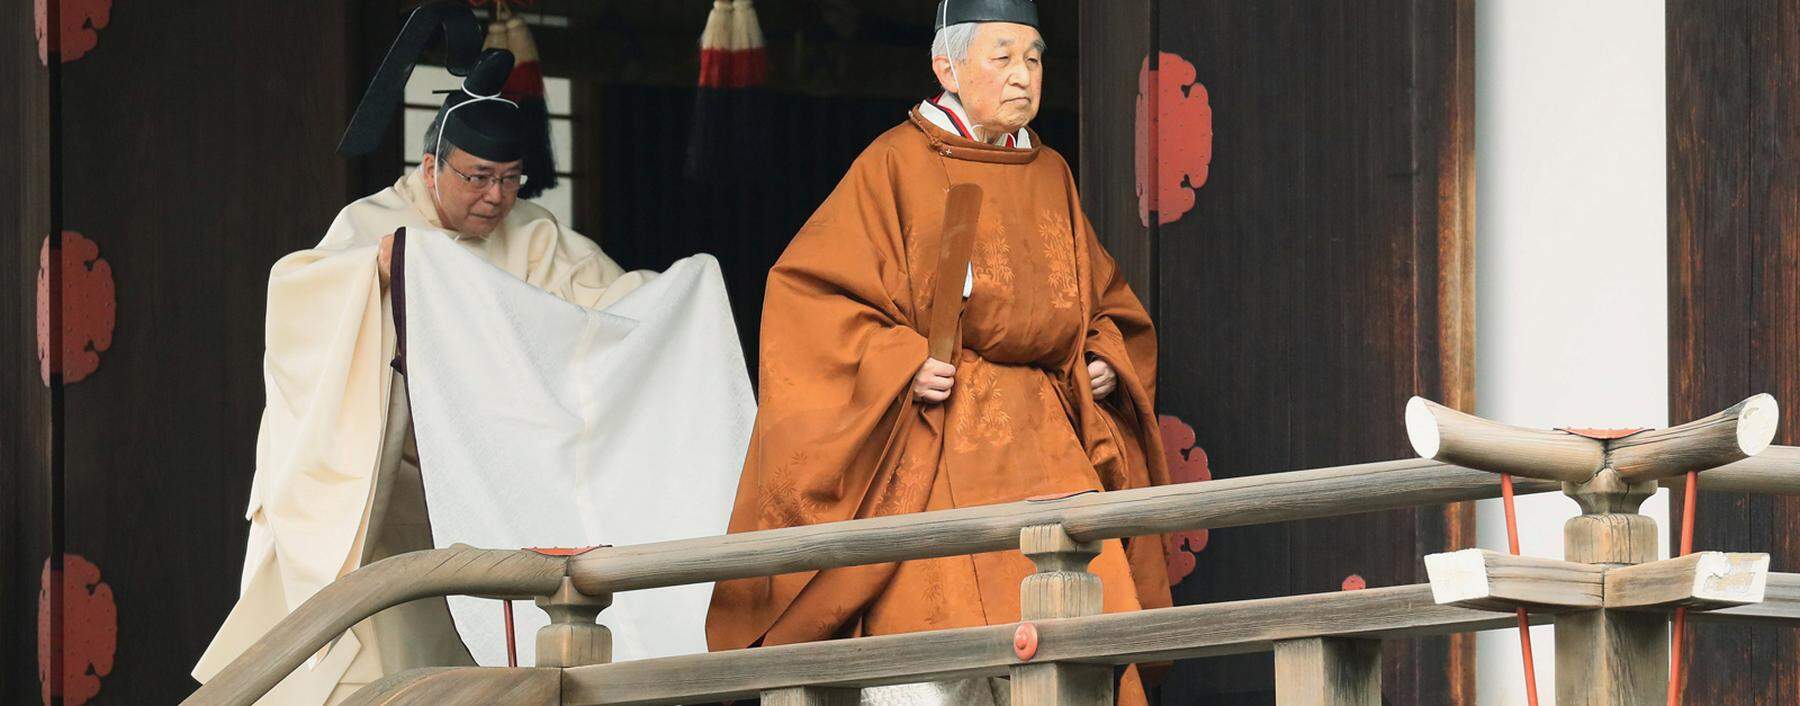 Japan´s Emperor Akihito walks for a ritual called Taiirei-Tojitsu-Kashikodokoro-Omae-no-gi, a ceremony for the Emperor to report the conduct of the abdication ceremony, at the Imperial Palace in Tokyo